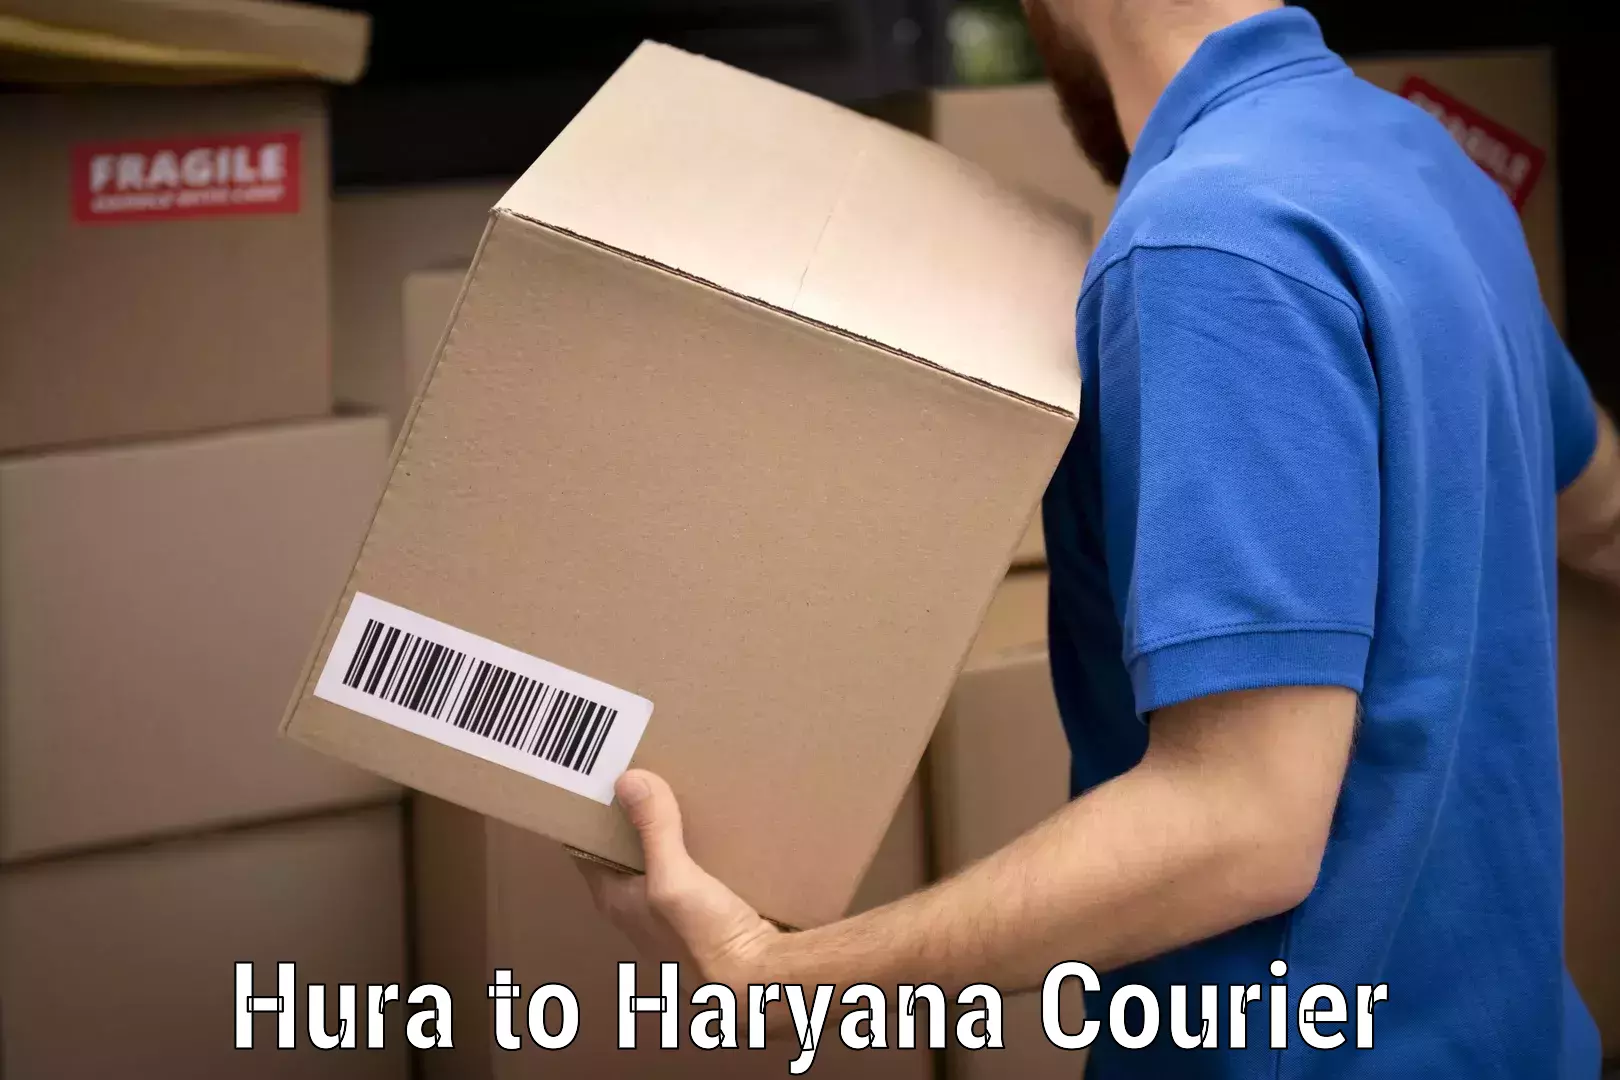 Trusted relocation experts Hura to Haryana